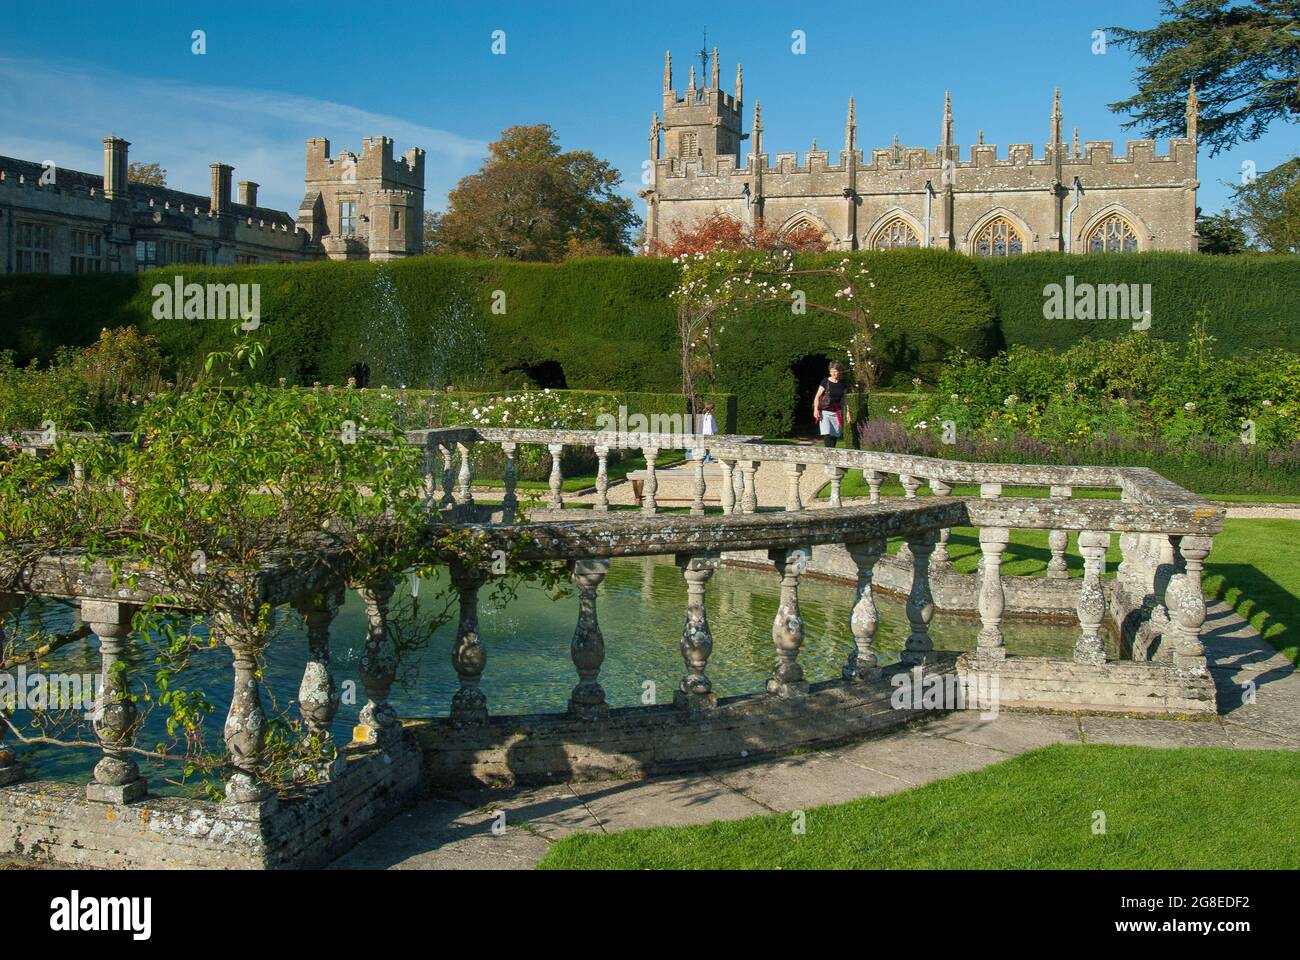 With royal connections spanning a thousand years, Sudeley Castle stands amidst the Cotswold hills at Winchcombe, Gloucestershire, England Stock Photo